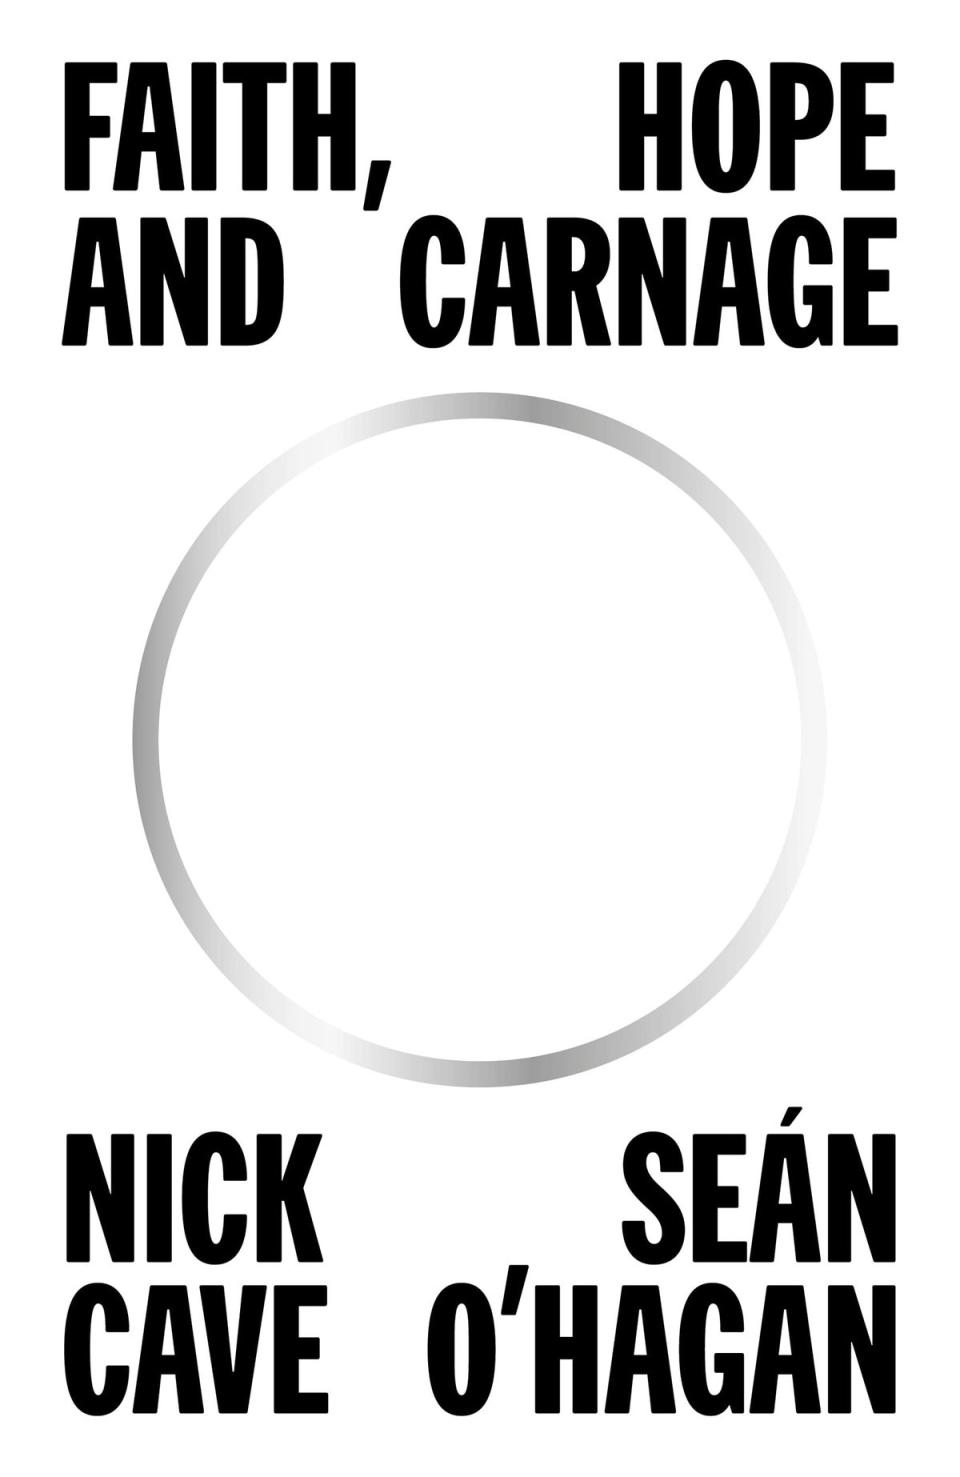 Faith, Hope and Carnage by Nick Cave and Seán O’Hagan (Supplied)